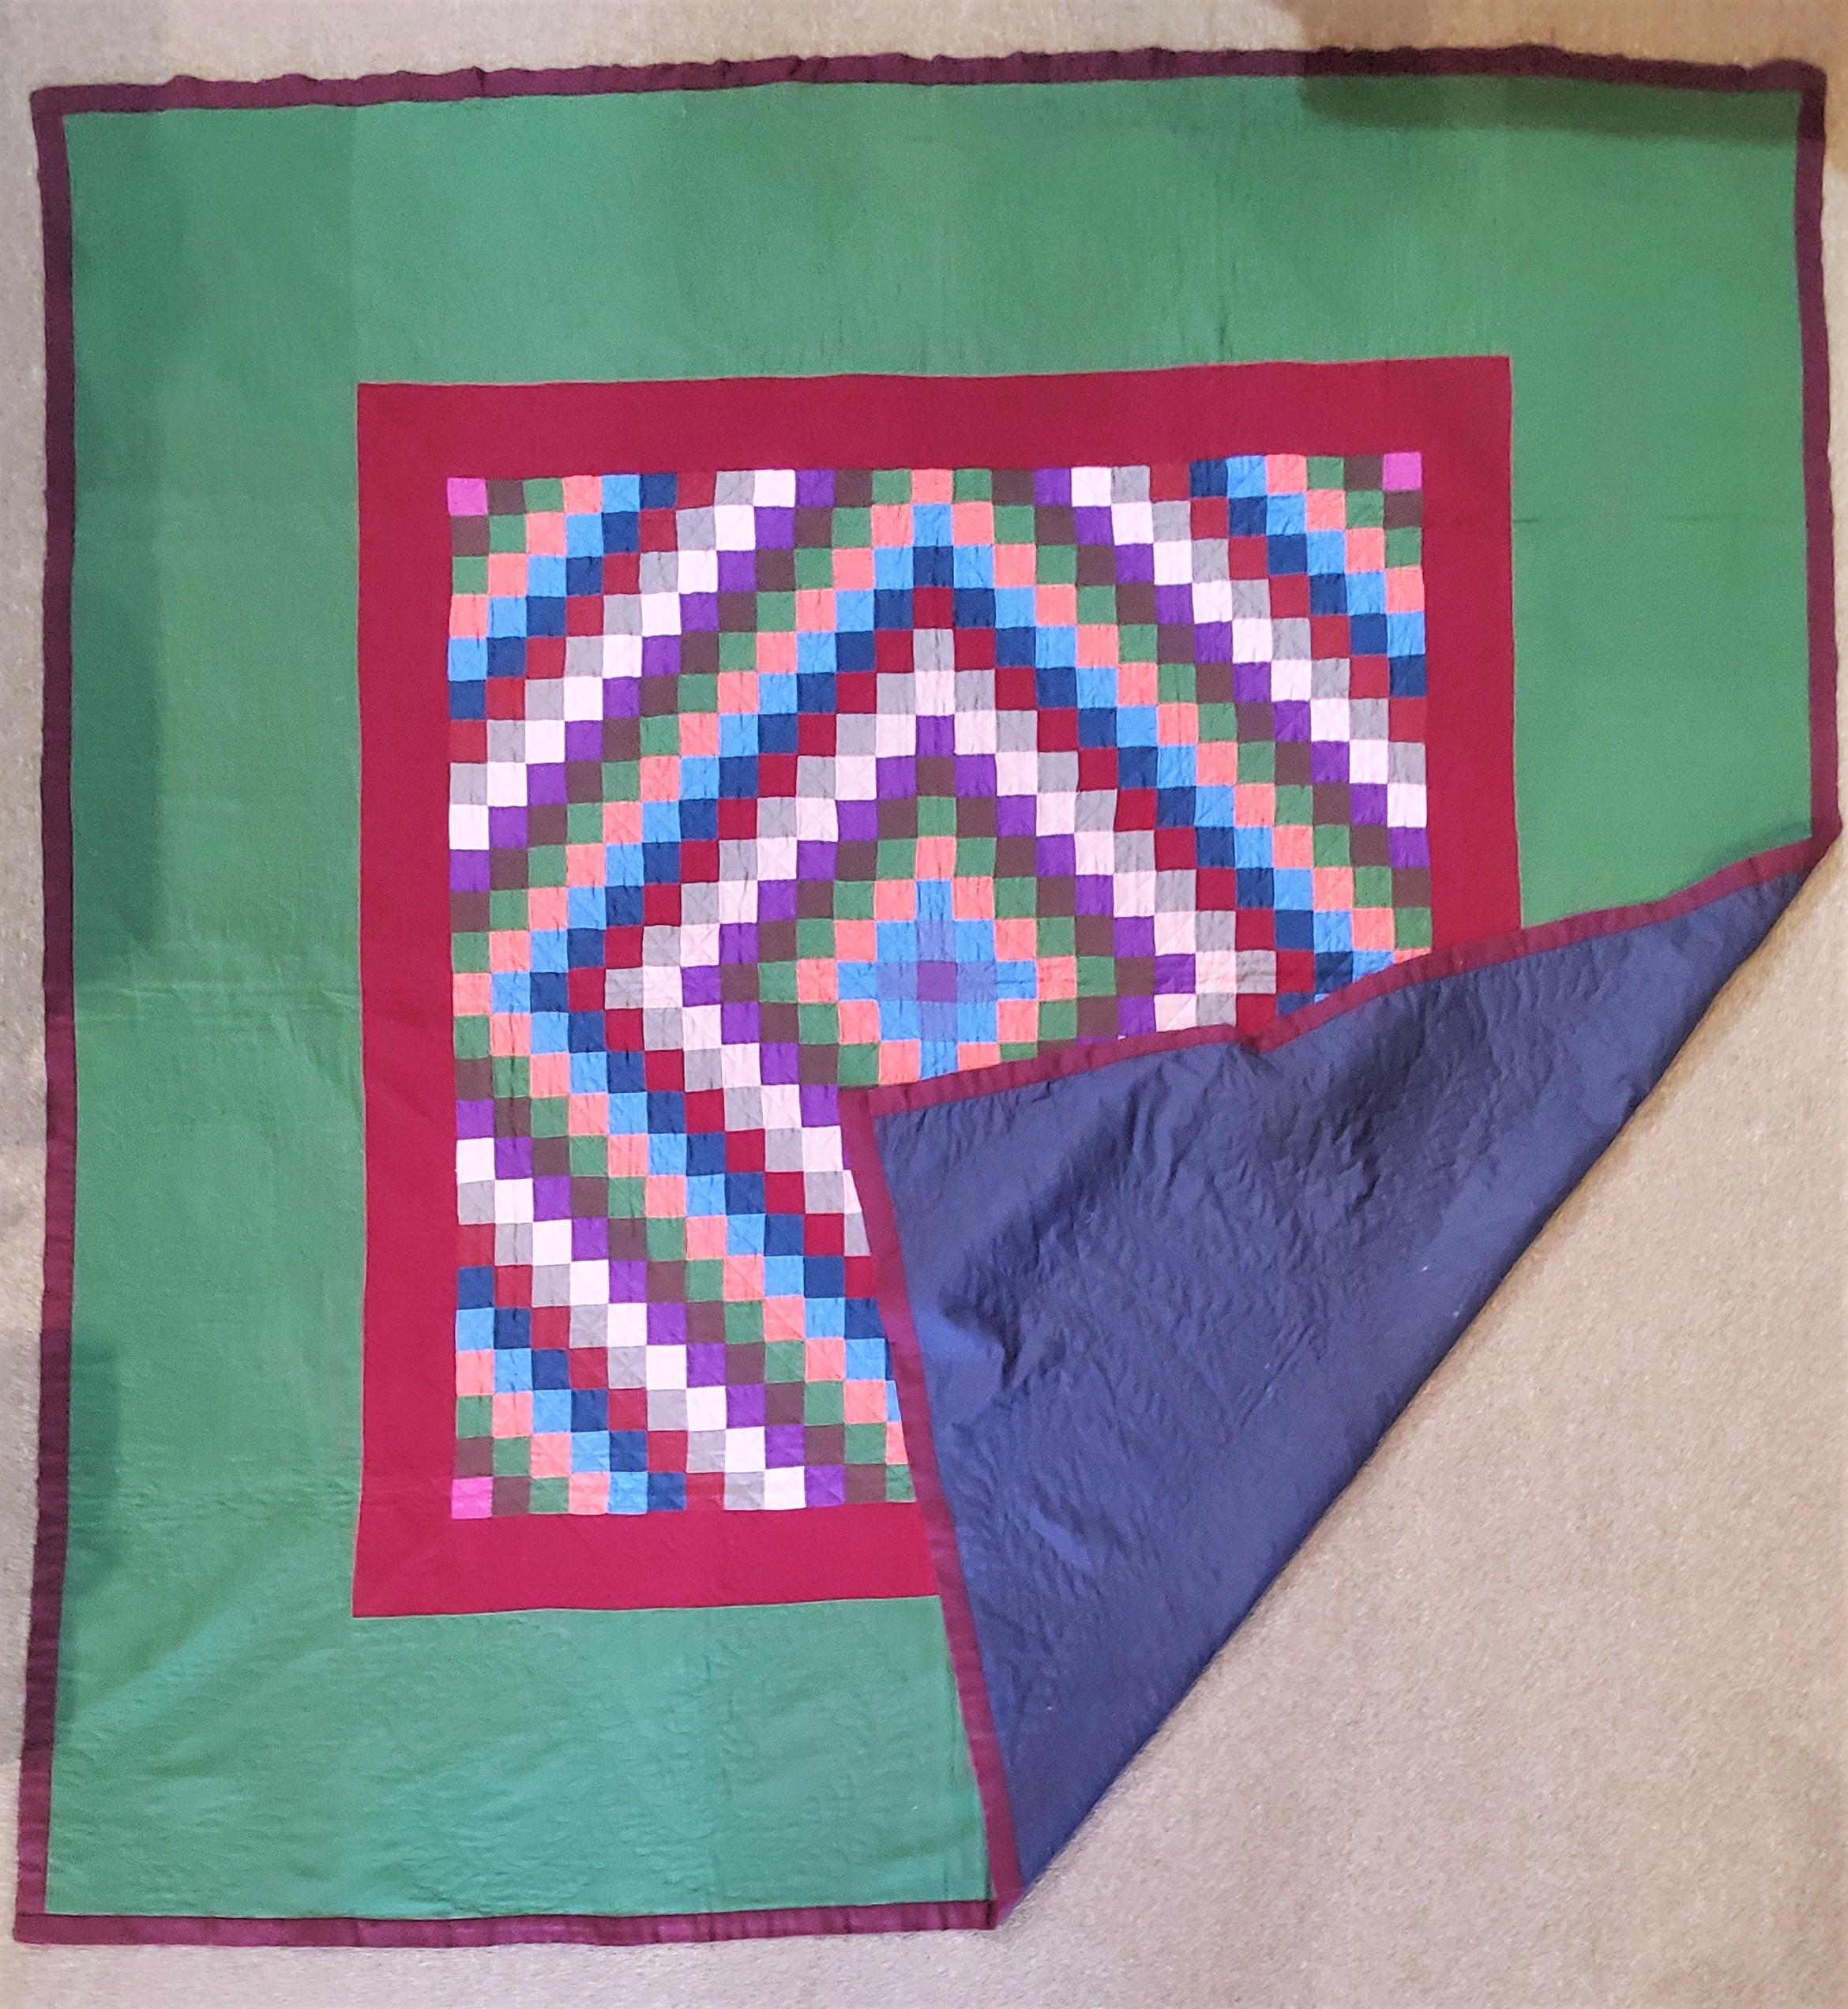 This 1930s Amish all wool Lancaster County, Pennsylvania sunshine and shadow in a square. This contained sunshine and shadow quilt is in pristine condition. The backing is a blue cotton sateen fabric. This quilt is finely quilted and great piecework.